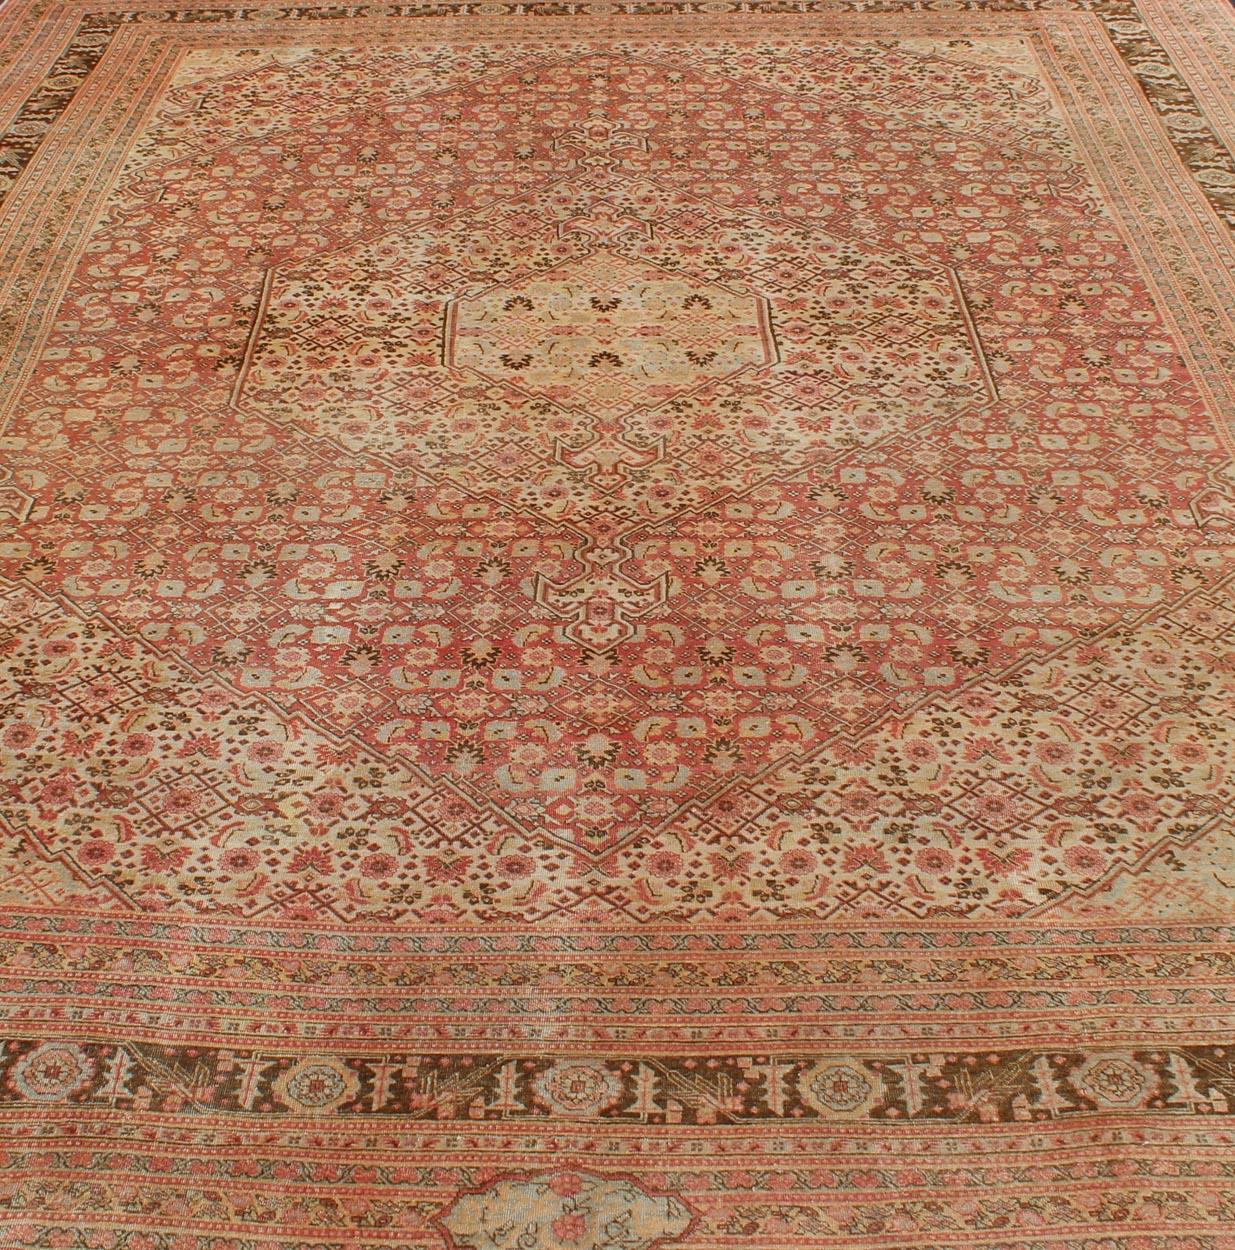 Antique Persian Tabriz Rug with Medallion Design in Coral, Cream and Brown Tones For Sale 4